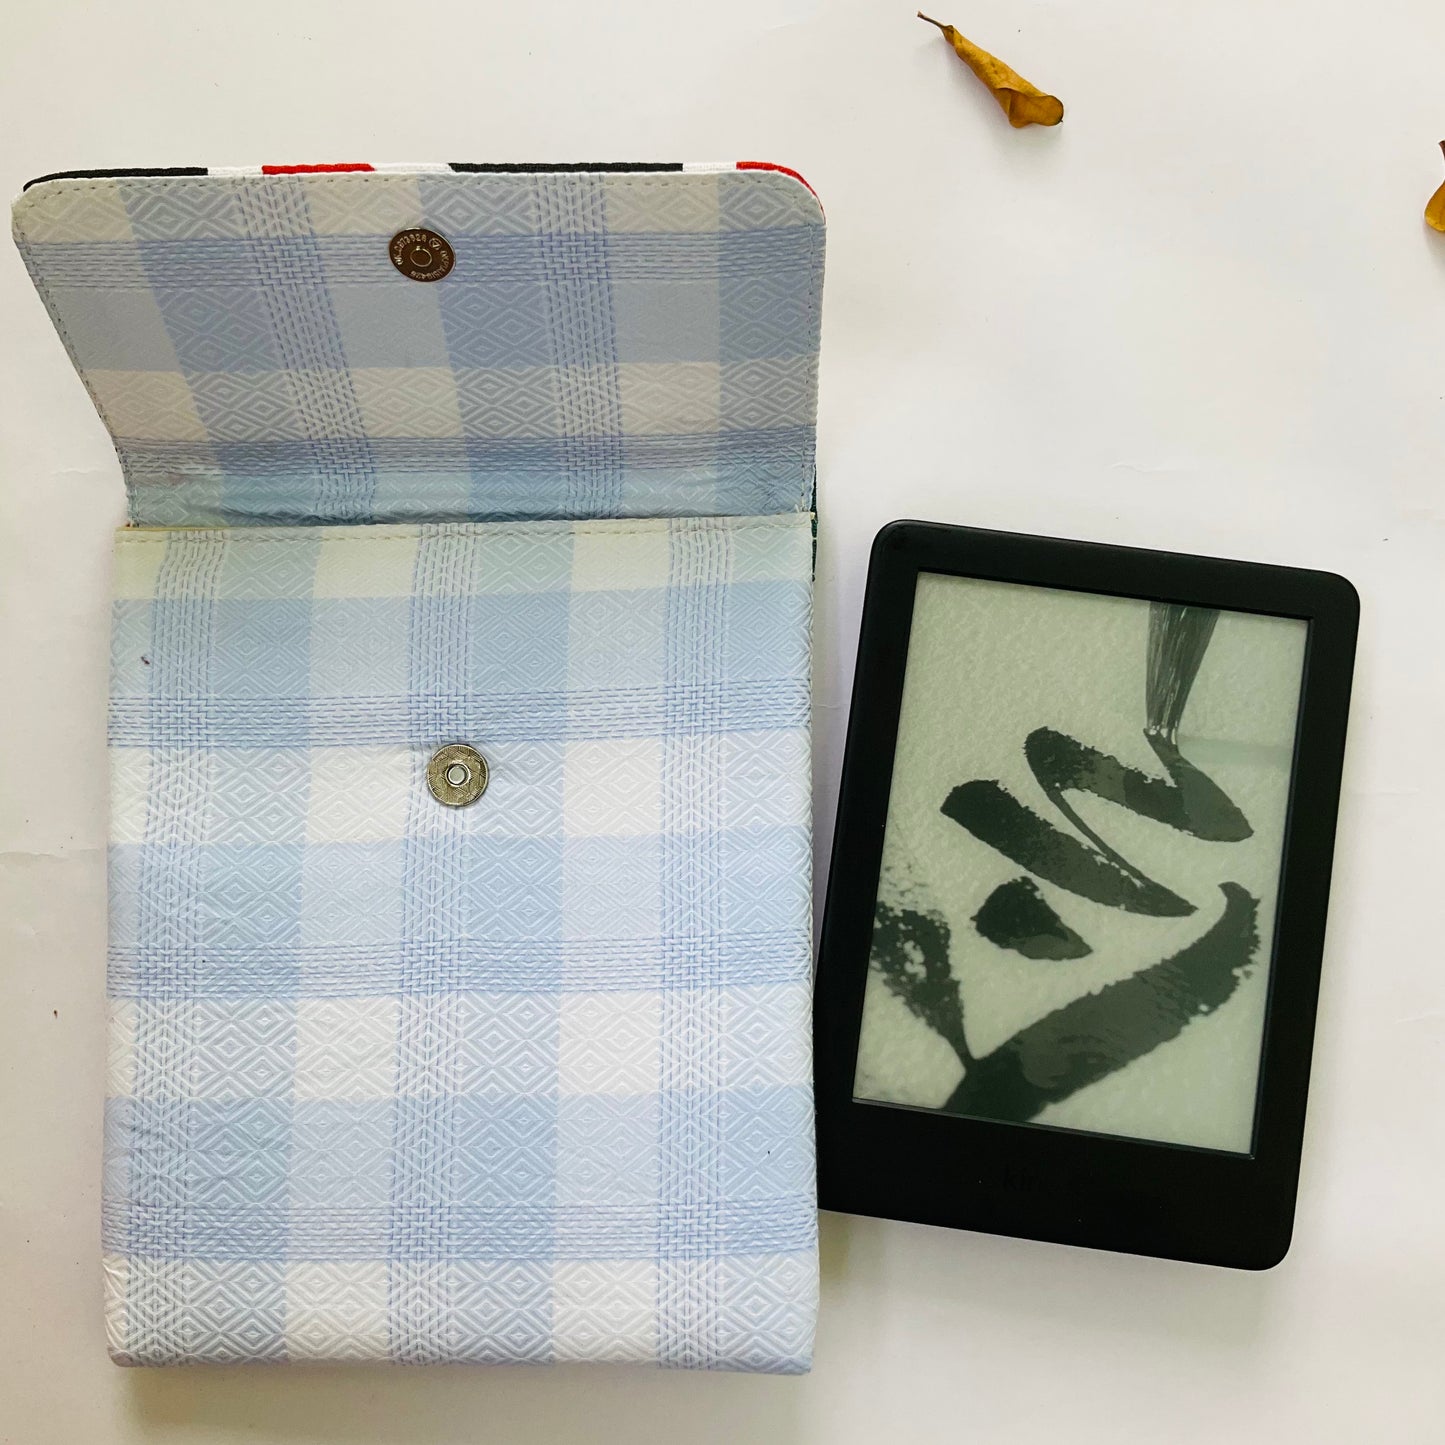 Kindle Cover-Fits all Kindle Paperwhite Gen 1 to 11, Kindle Oasis, Amazon Fire Tab-Blue checks with Geometric shapes